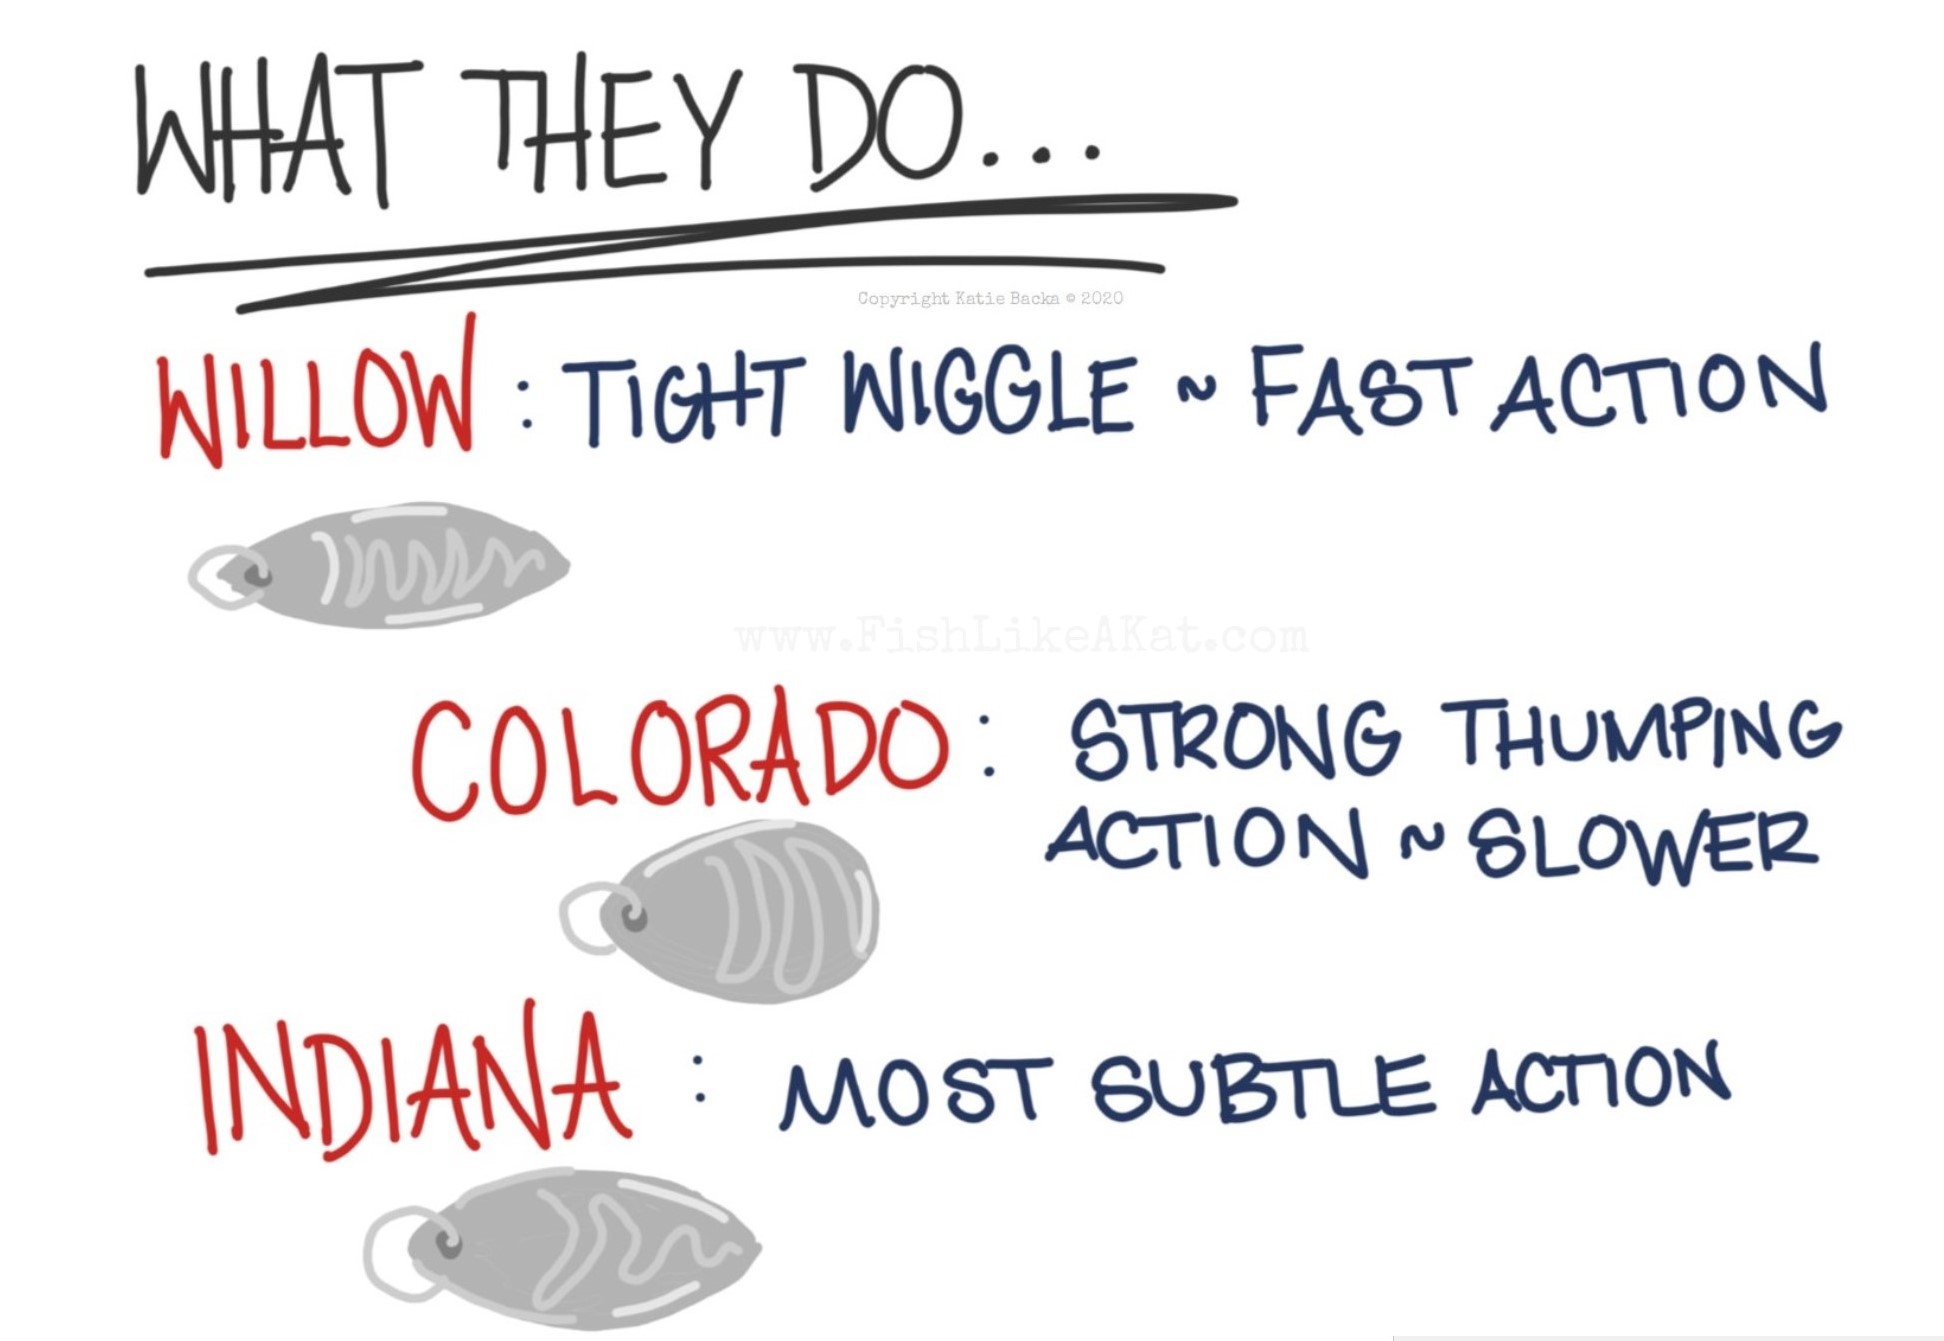 text: What they do...willow: tight wiggle, fast action. Colorado: strong thumping action, slower. Indiana: most subtle action. With illustrations of each type of blade.